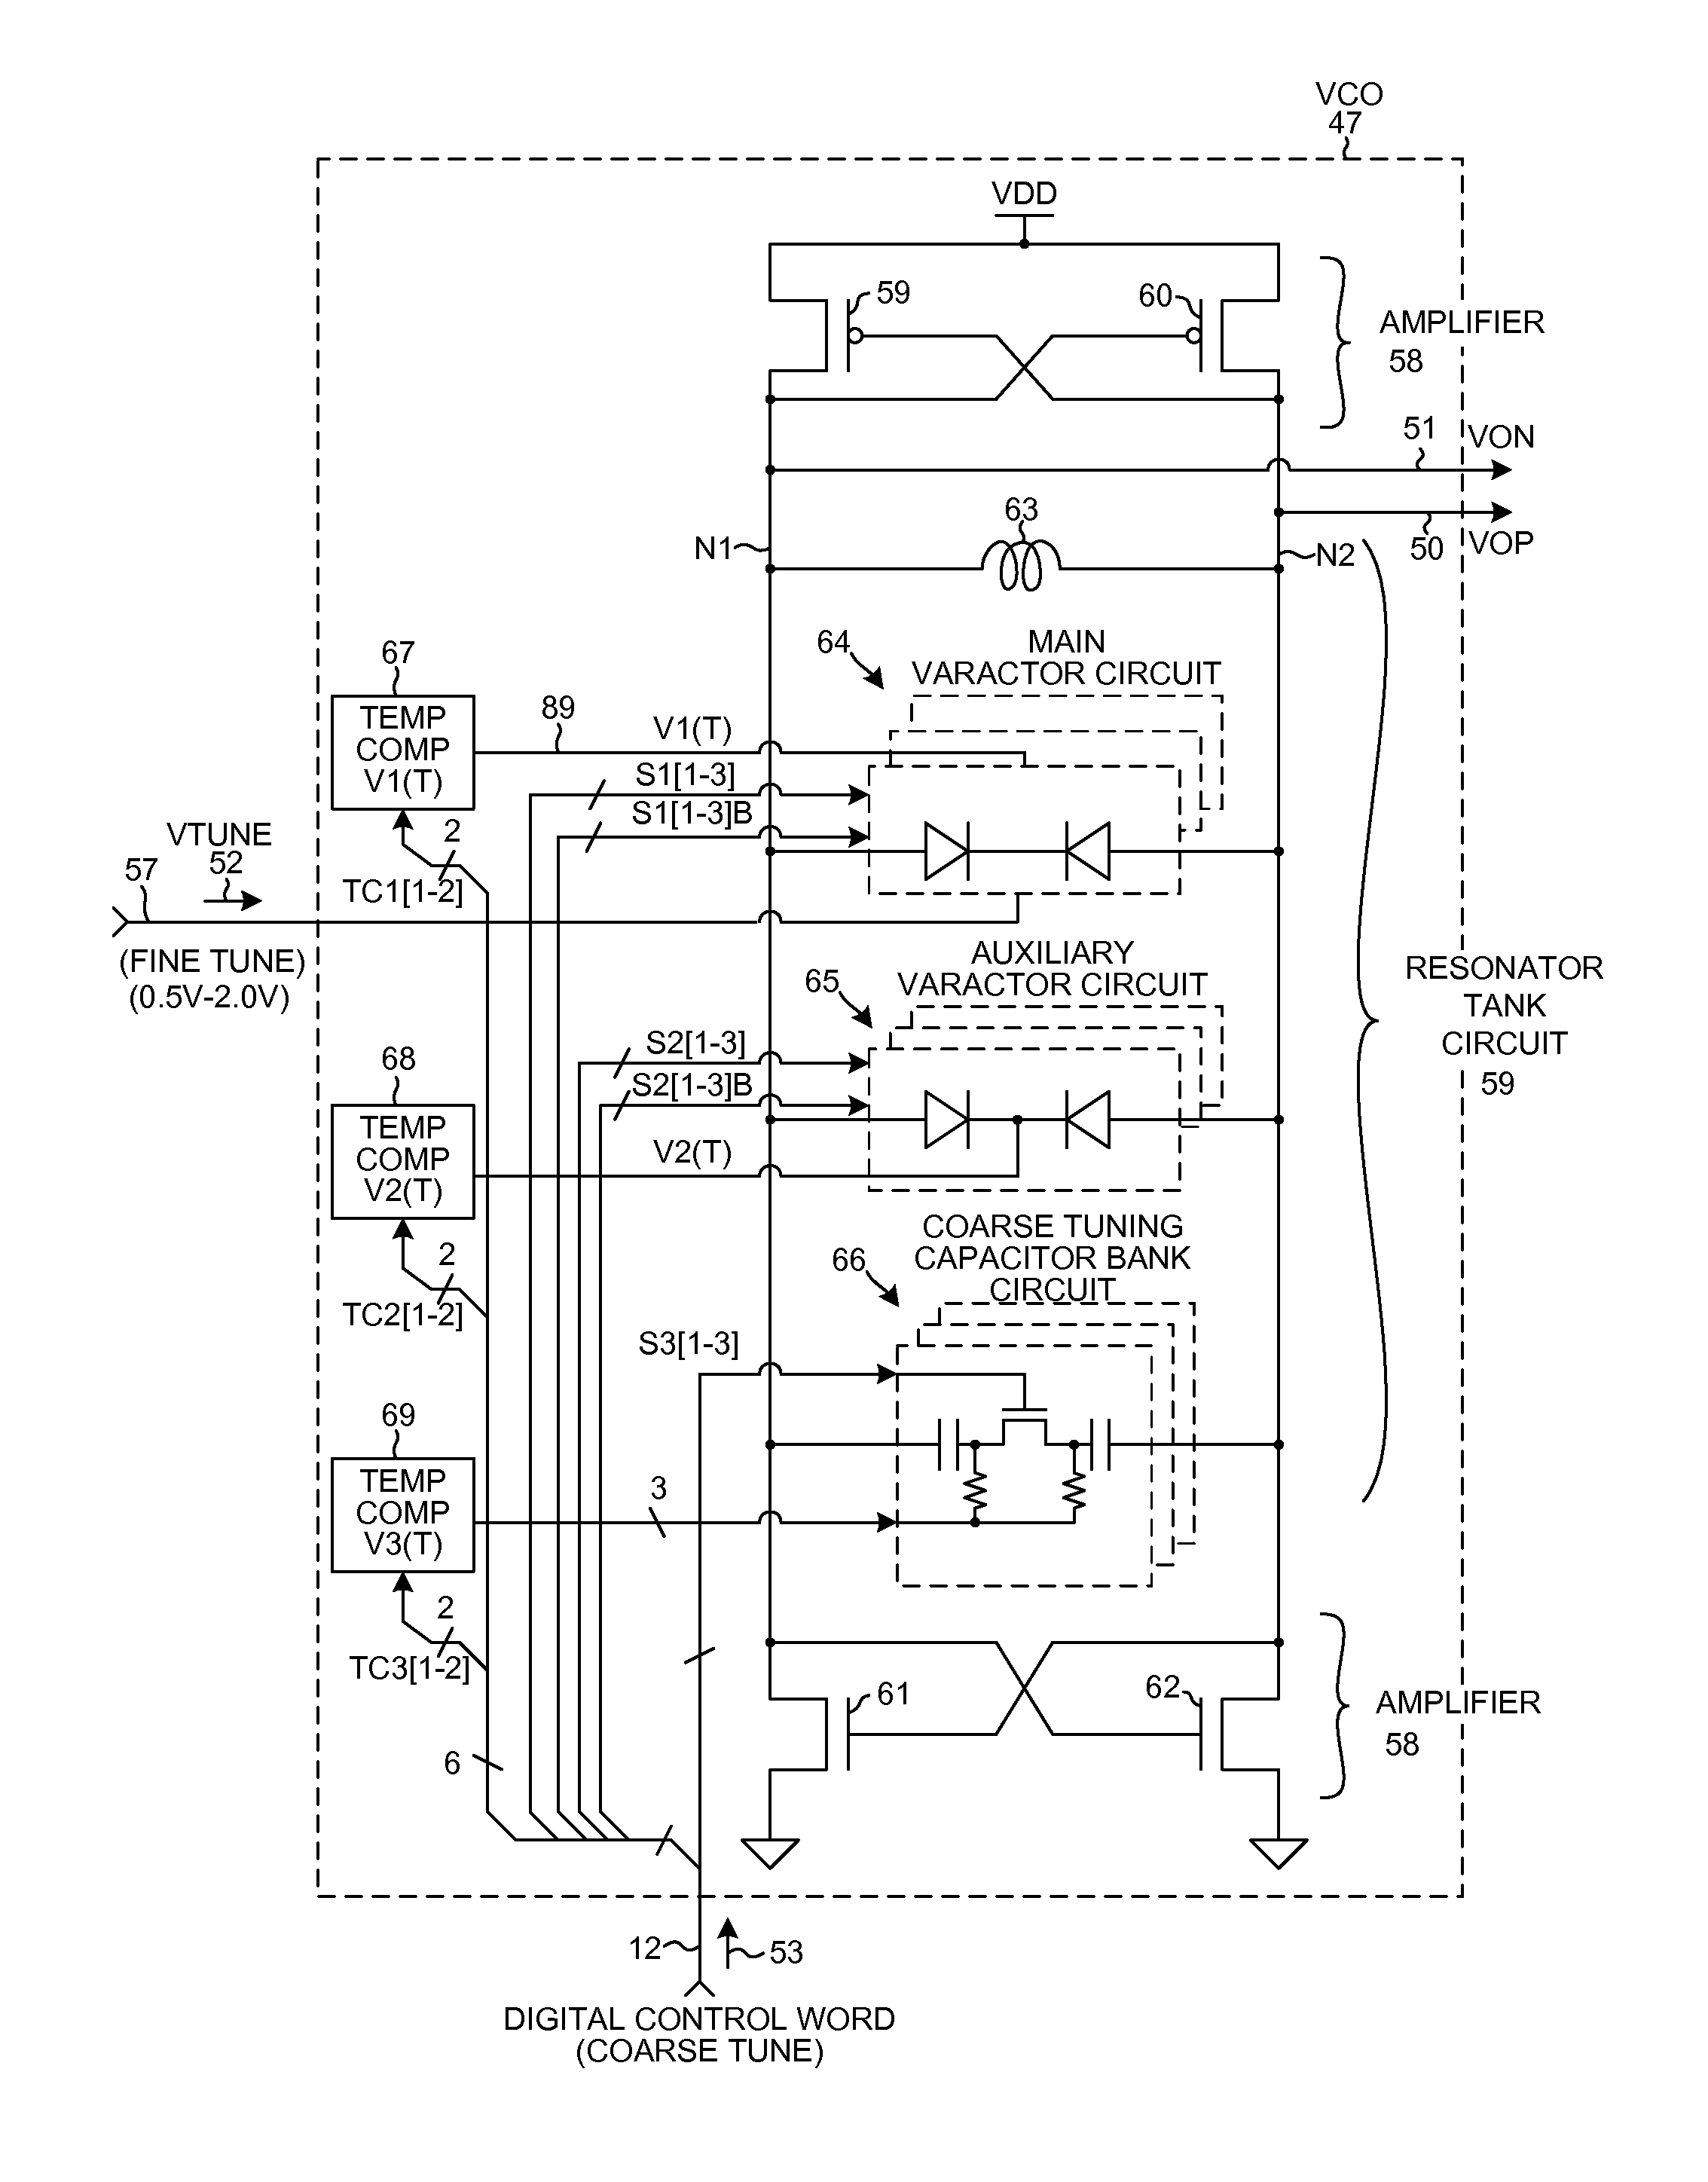 Wideband temperature compensated resonator and wideband VCO